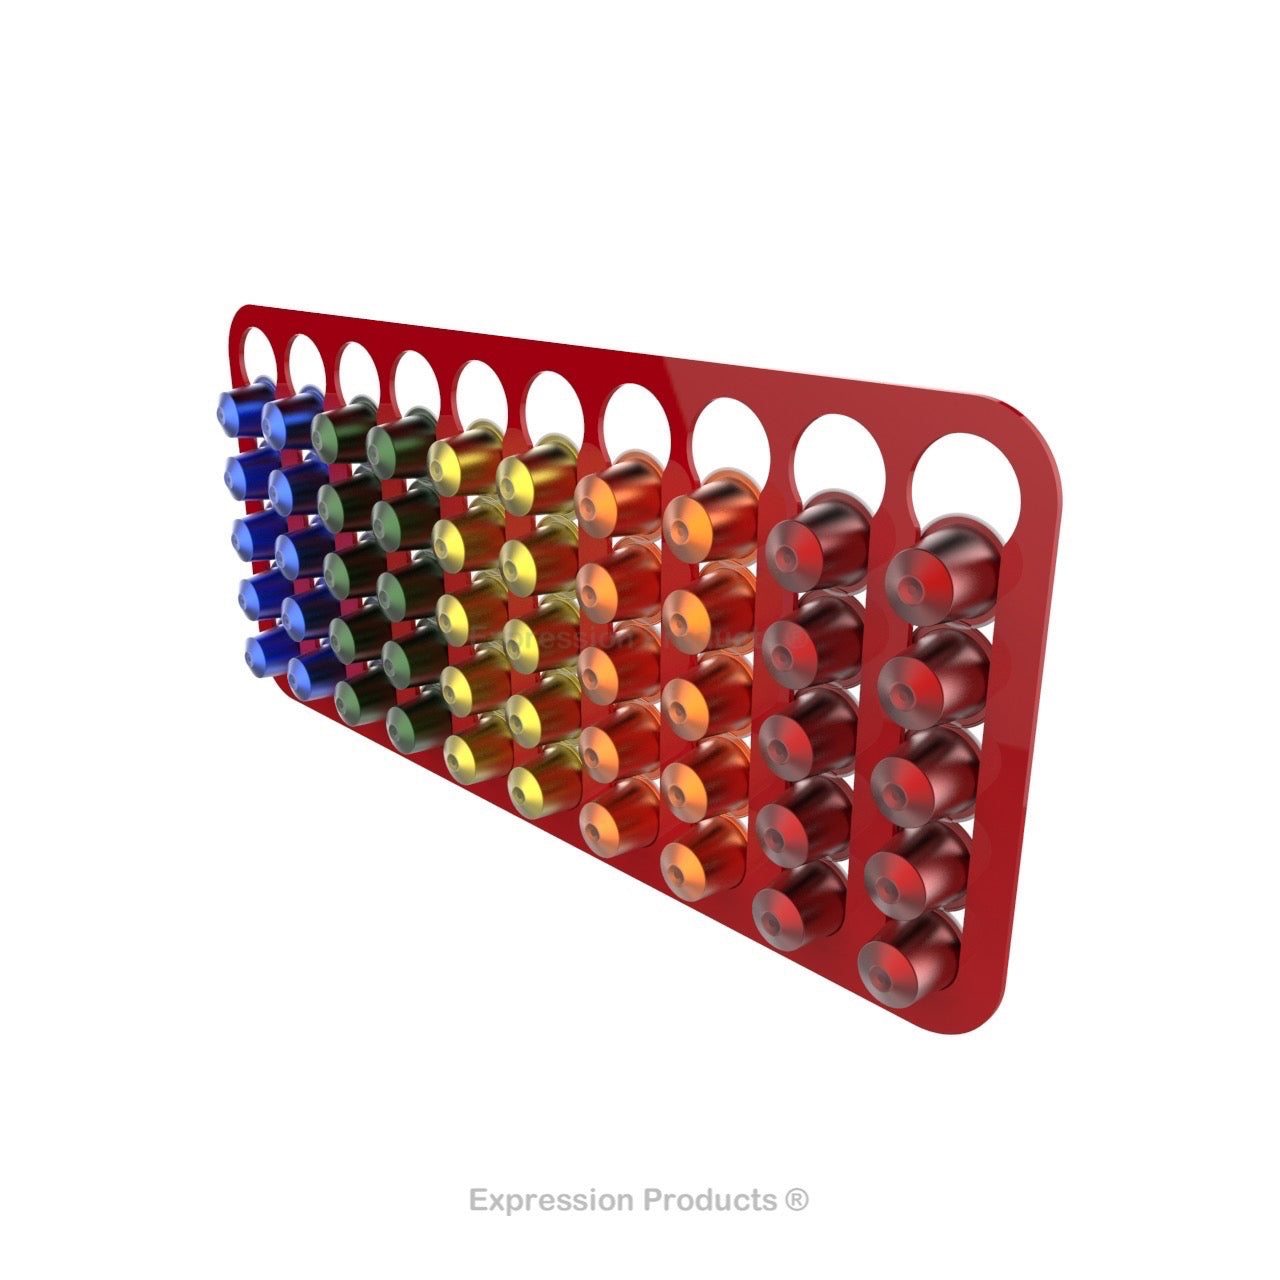 Magnetic Nespresso Original Line coffee pod holder shown in red holding 50 pods